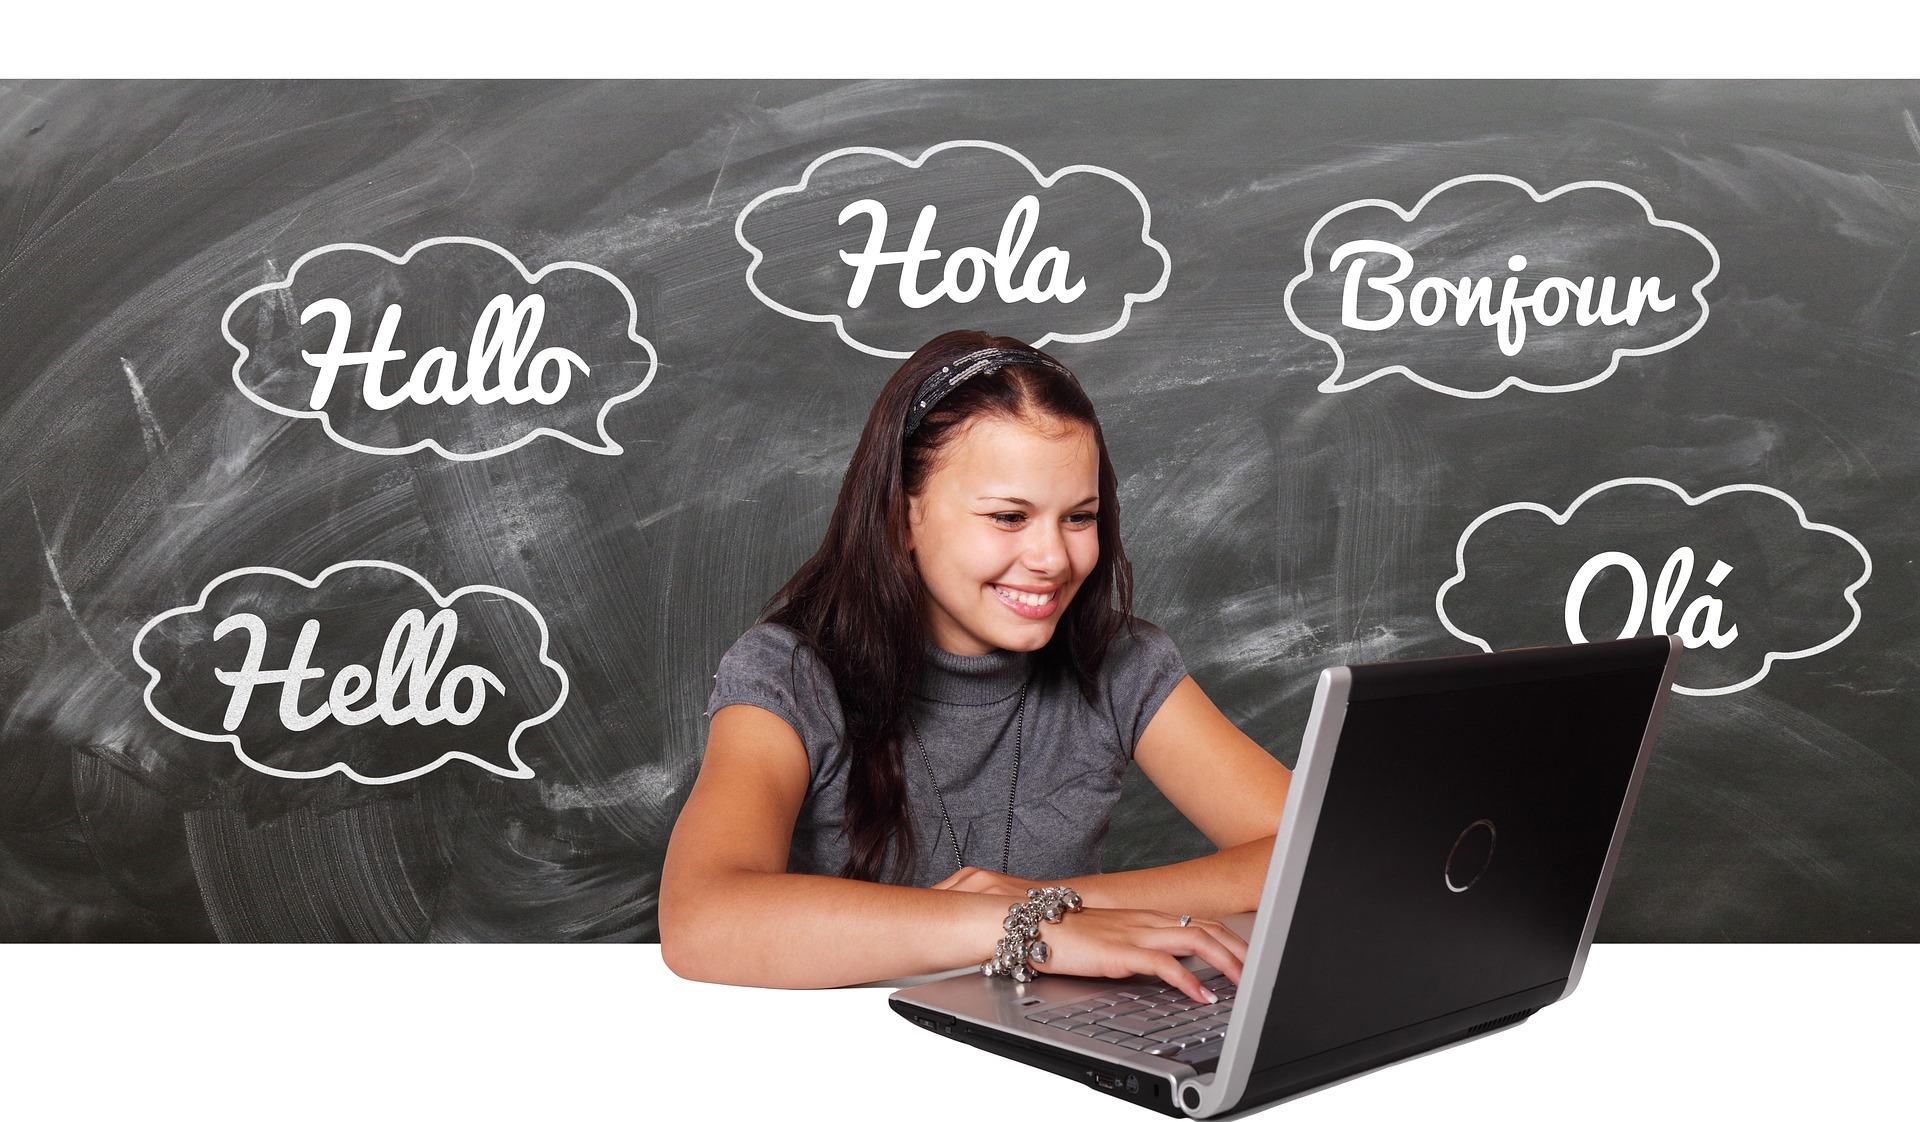 A woman sits at a laptop in front of a chalkboard that has "hello" writing in several languages